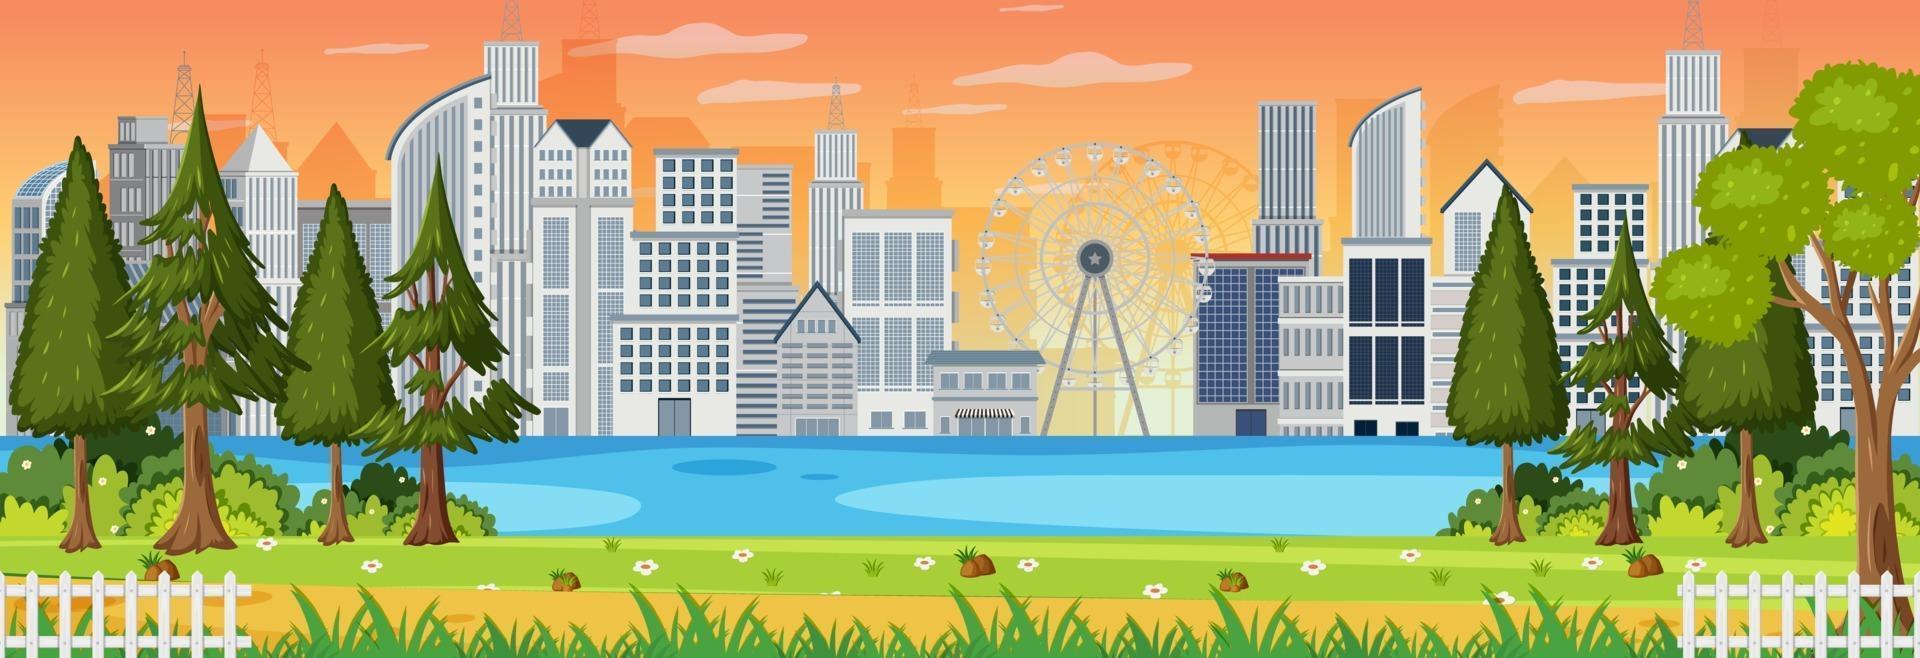 Park horizontal scene with cityscape background at sunset time vector